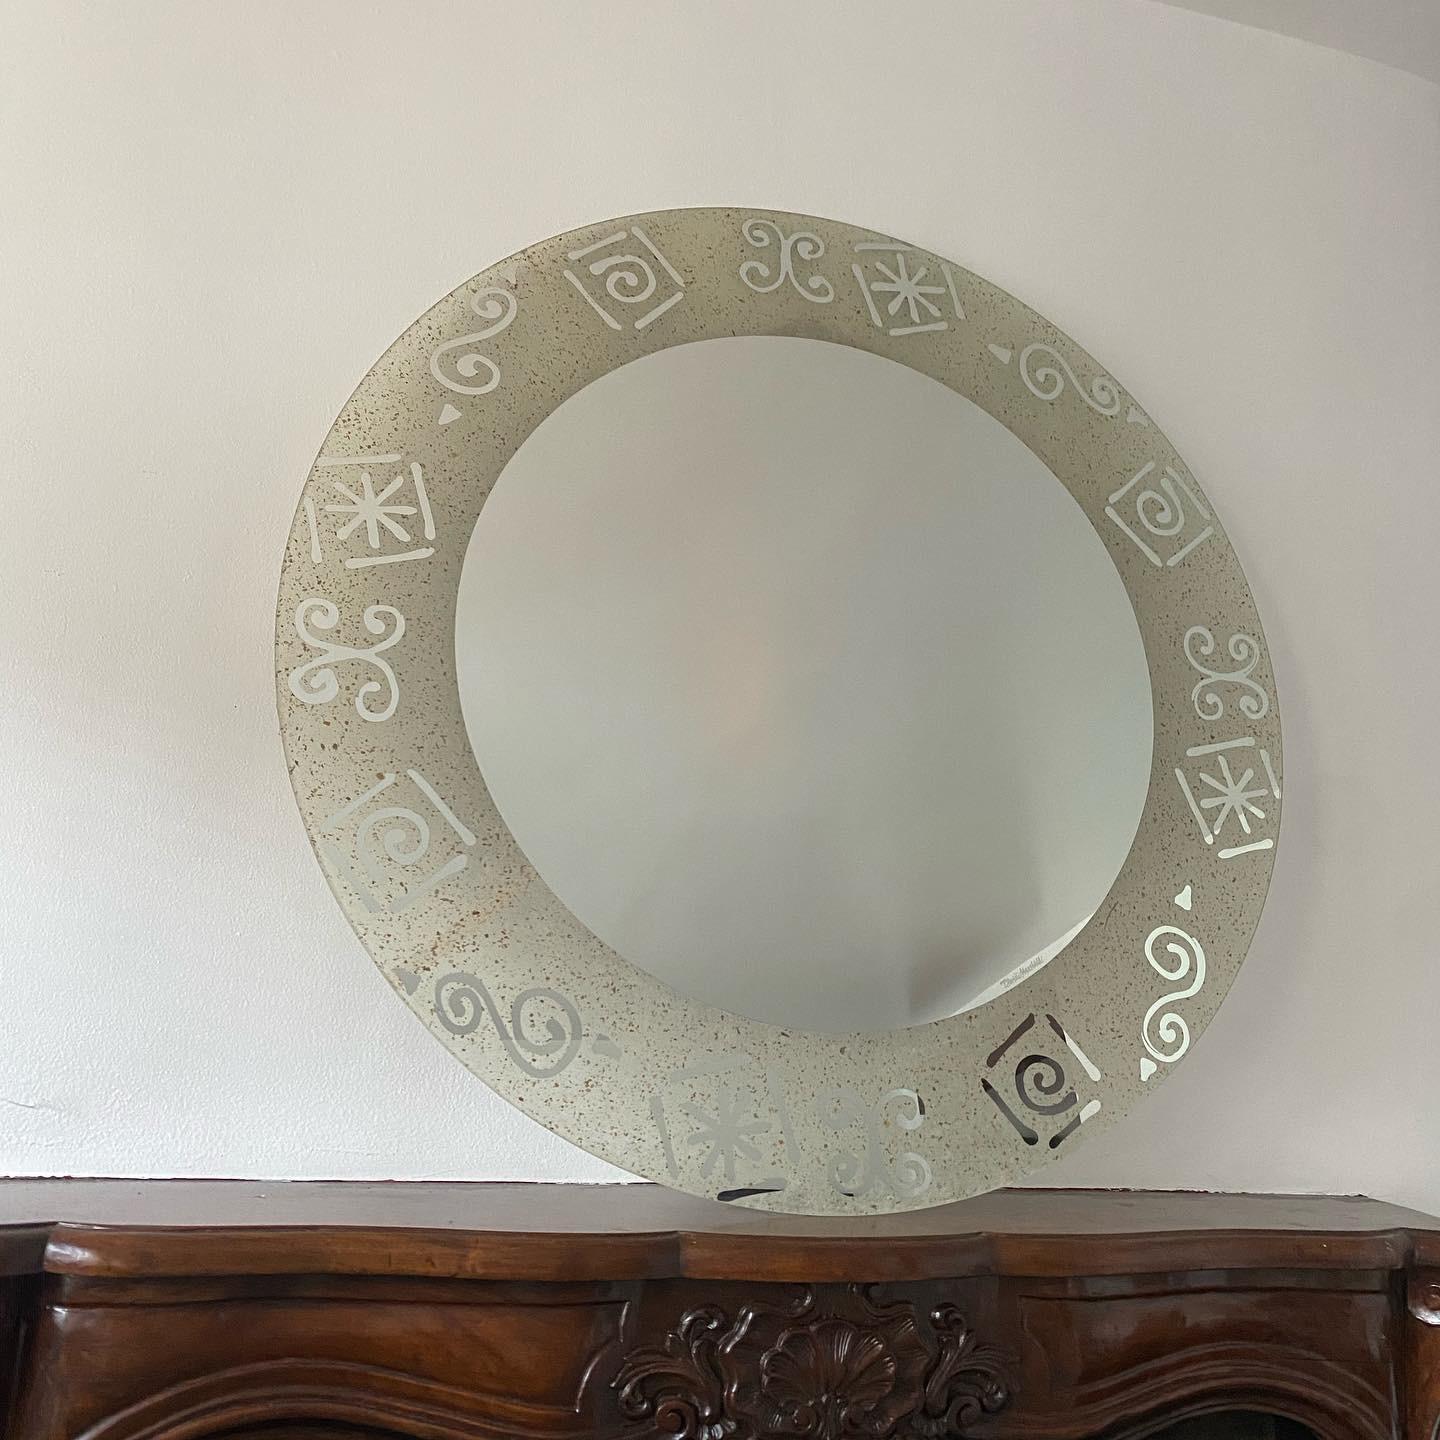 David Marshall signed large round mirror is a striking piece of art that will elevate any space in which it is displayed. The center mirror is framed by abstract symbols around perimeter with spotted gilt and copper leaf flecks, truly unique piece